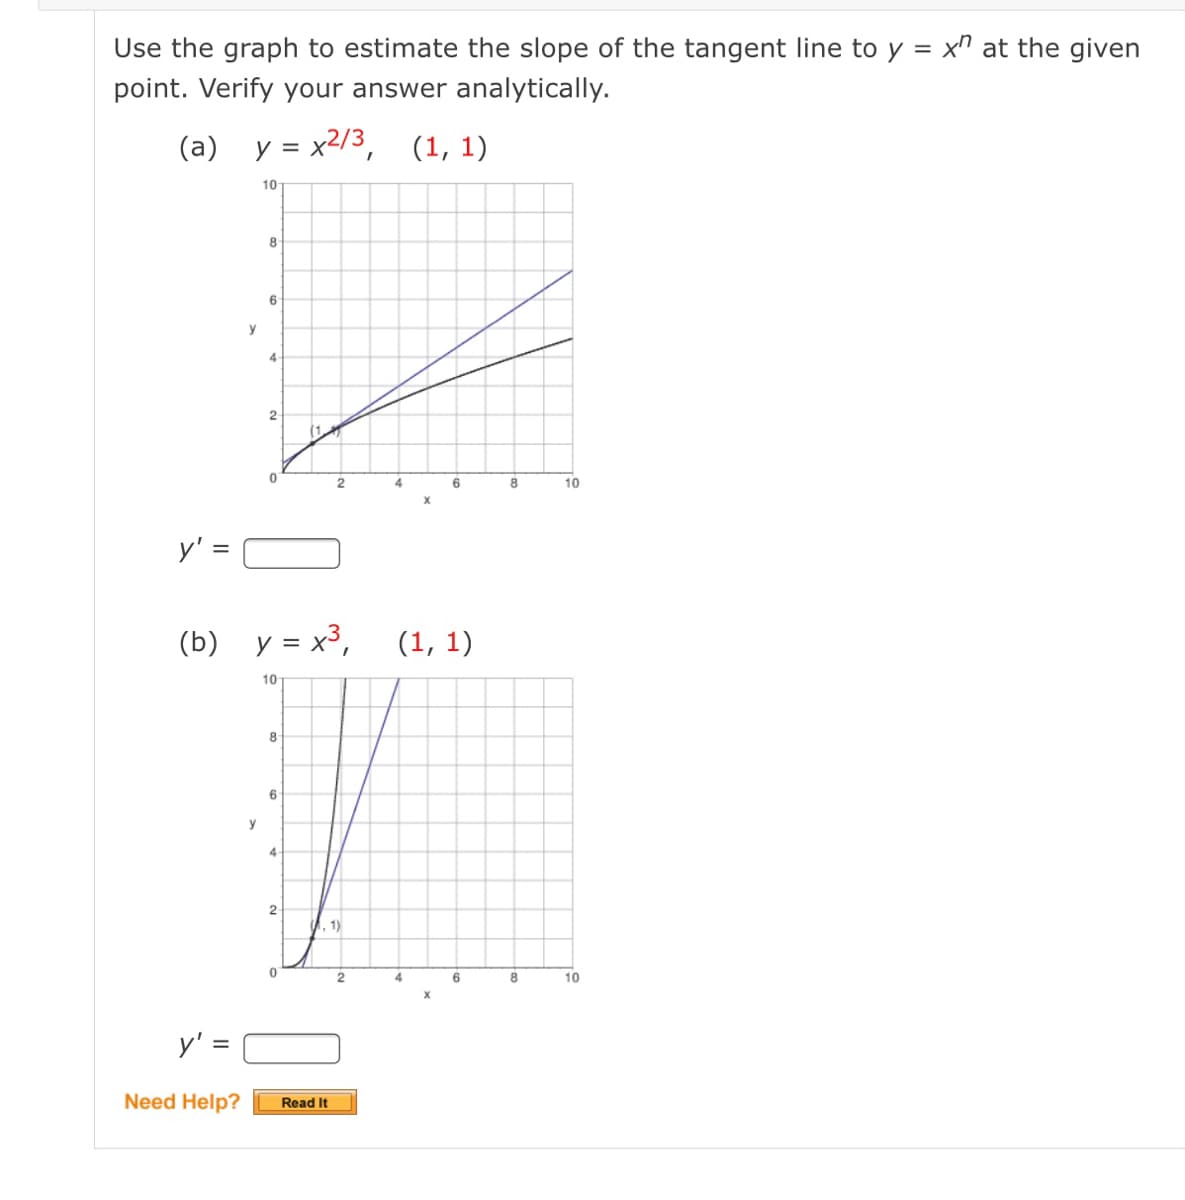 Use the graph to estimate the slope of the tangent line to y = x" at the given
point. Verify your answer analytically.
(a)
y = x2/3,
(1, 1)
10
8
6
y
4
2
4
6
8
10
y':
(b) y = x³,
(1, 1)
10
8
6
y
4-
U, 1)
2
4
8
10
y' =
Need Help?
Read It
